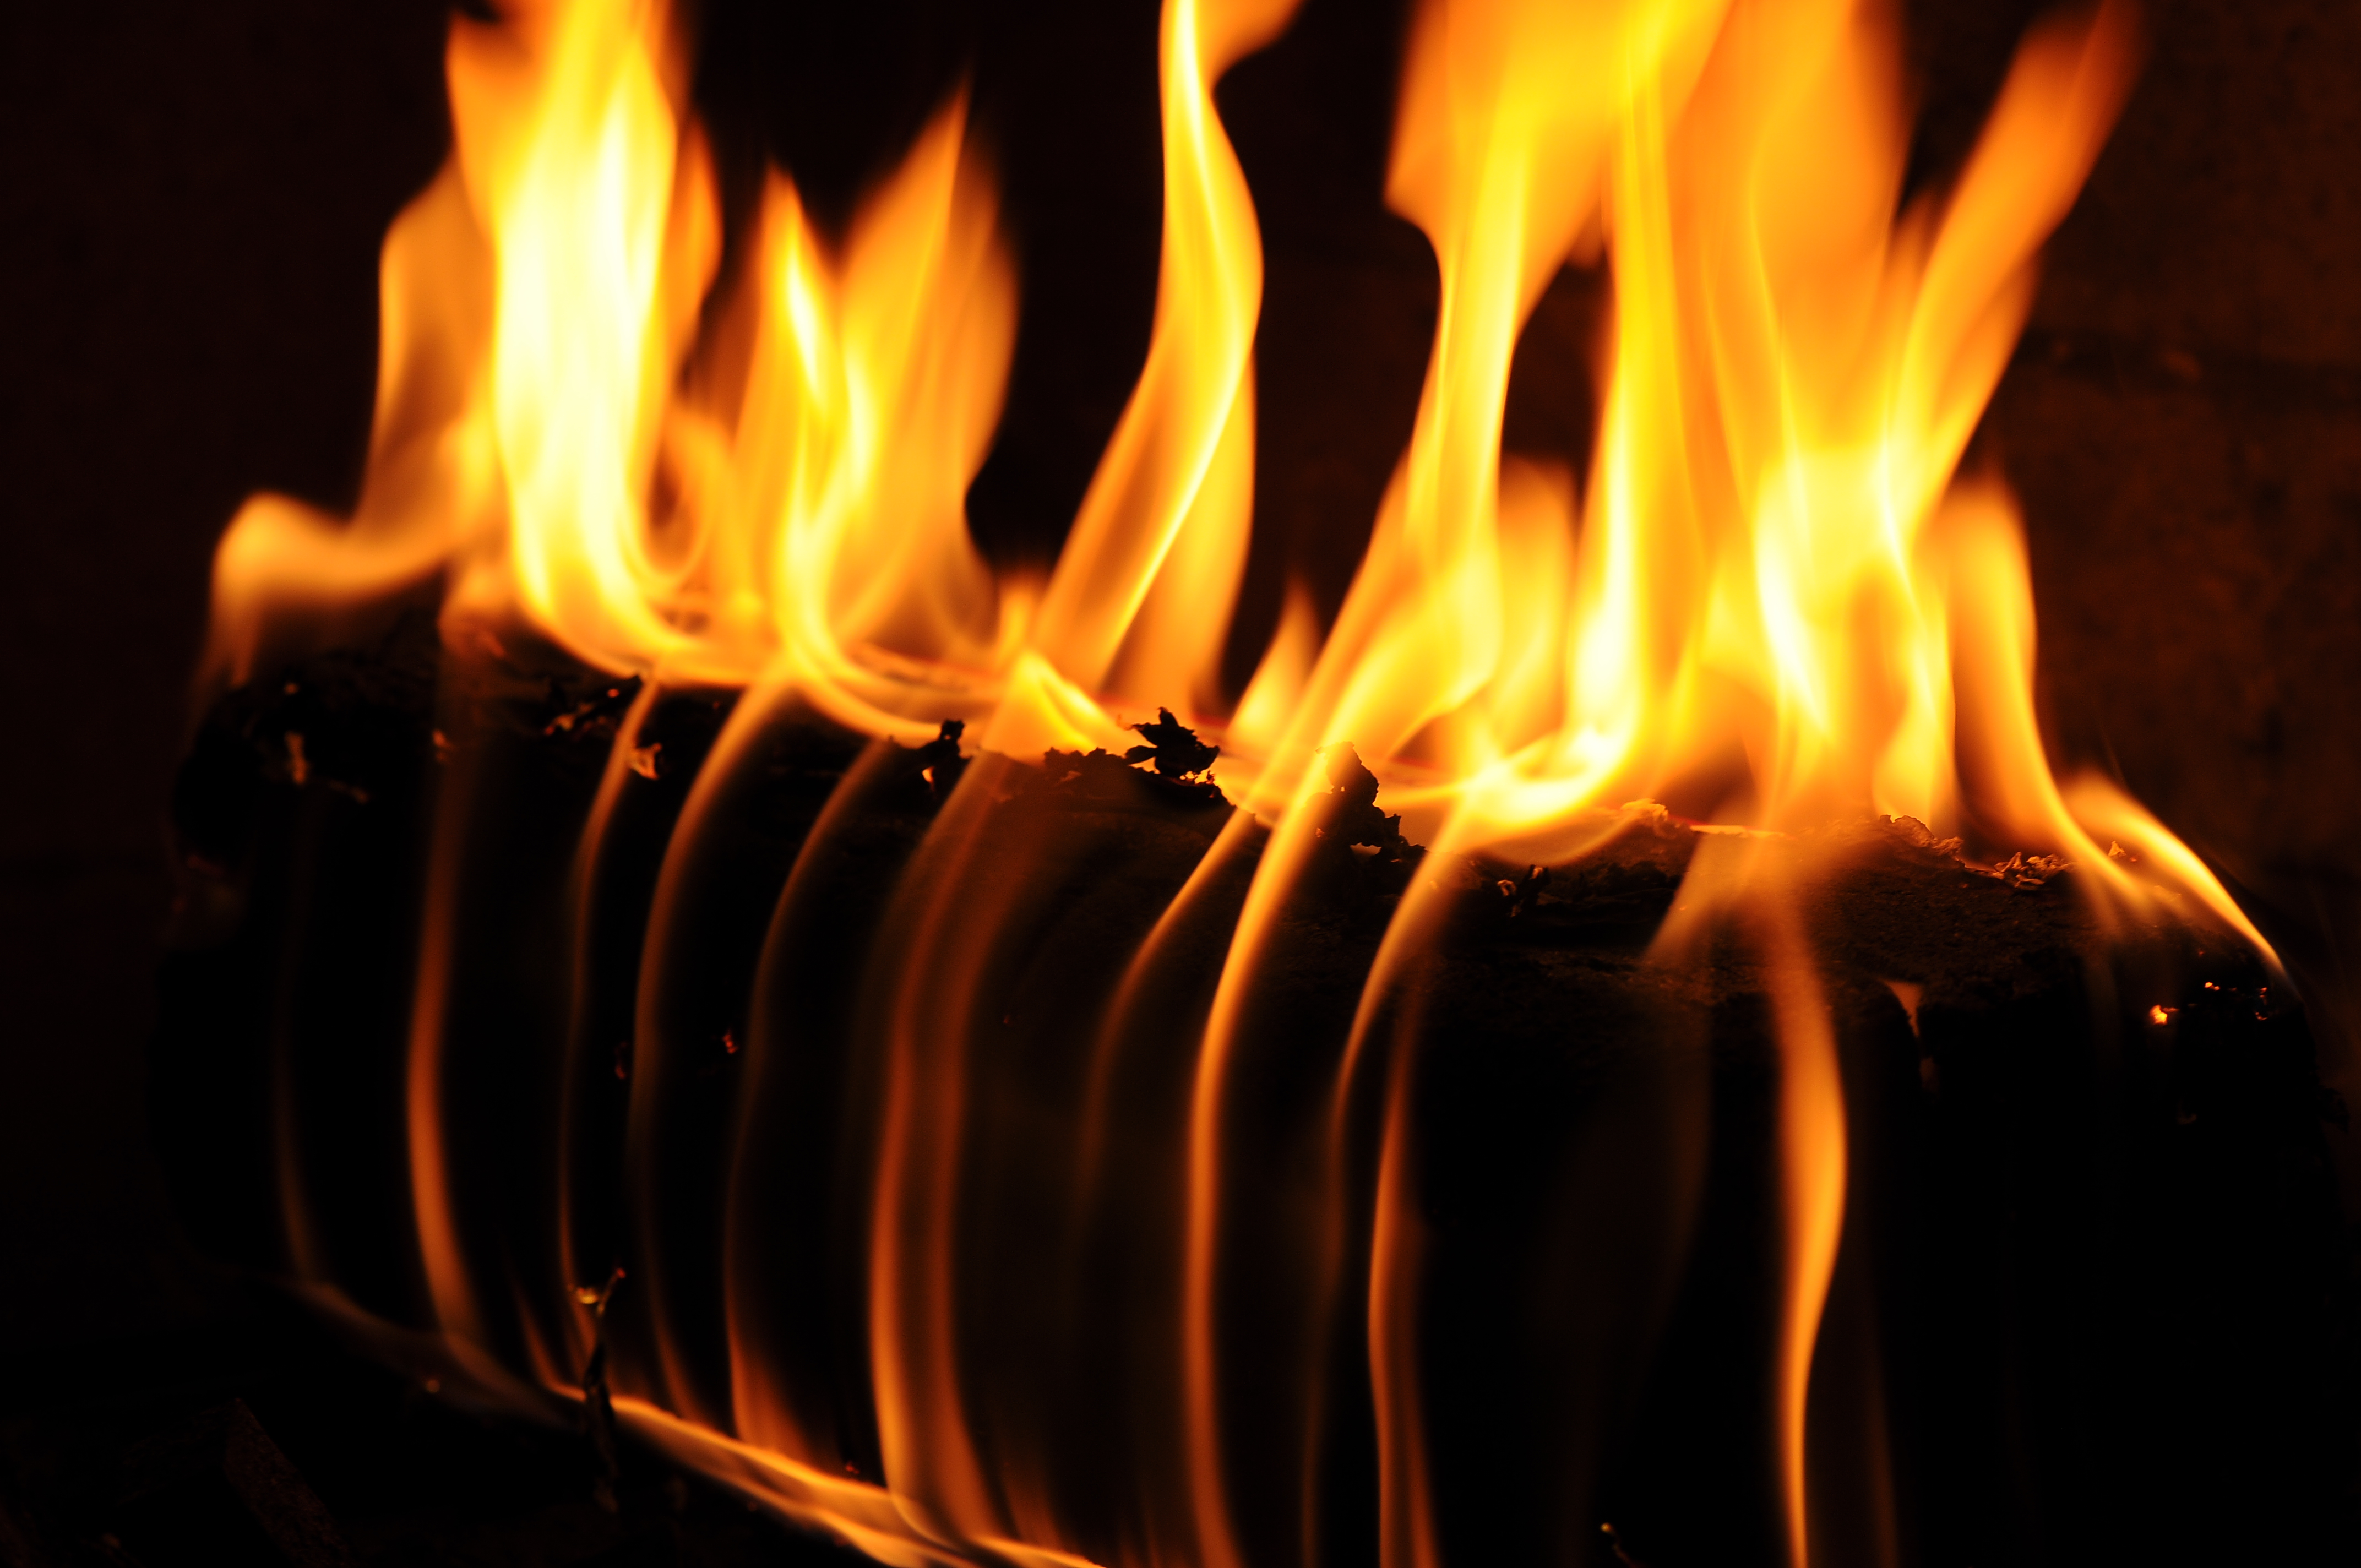 Fire 4k Ultra HD Wallpaper and Background Image ...